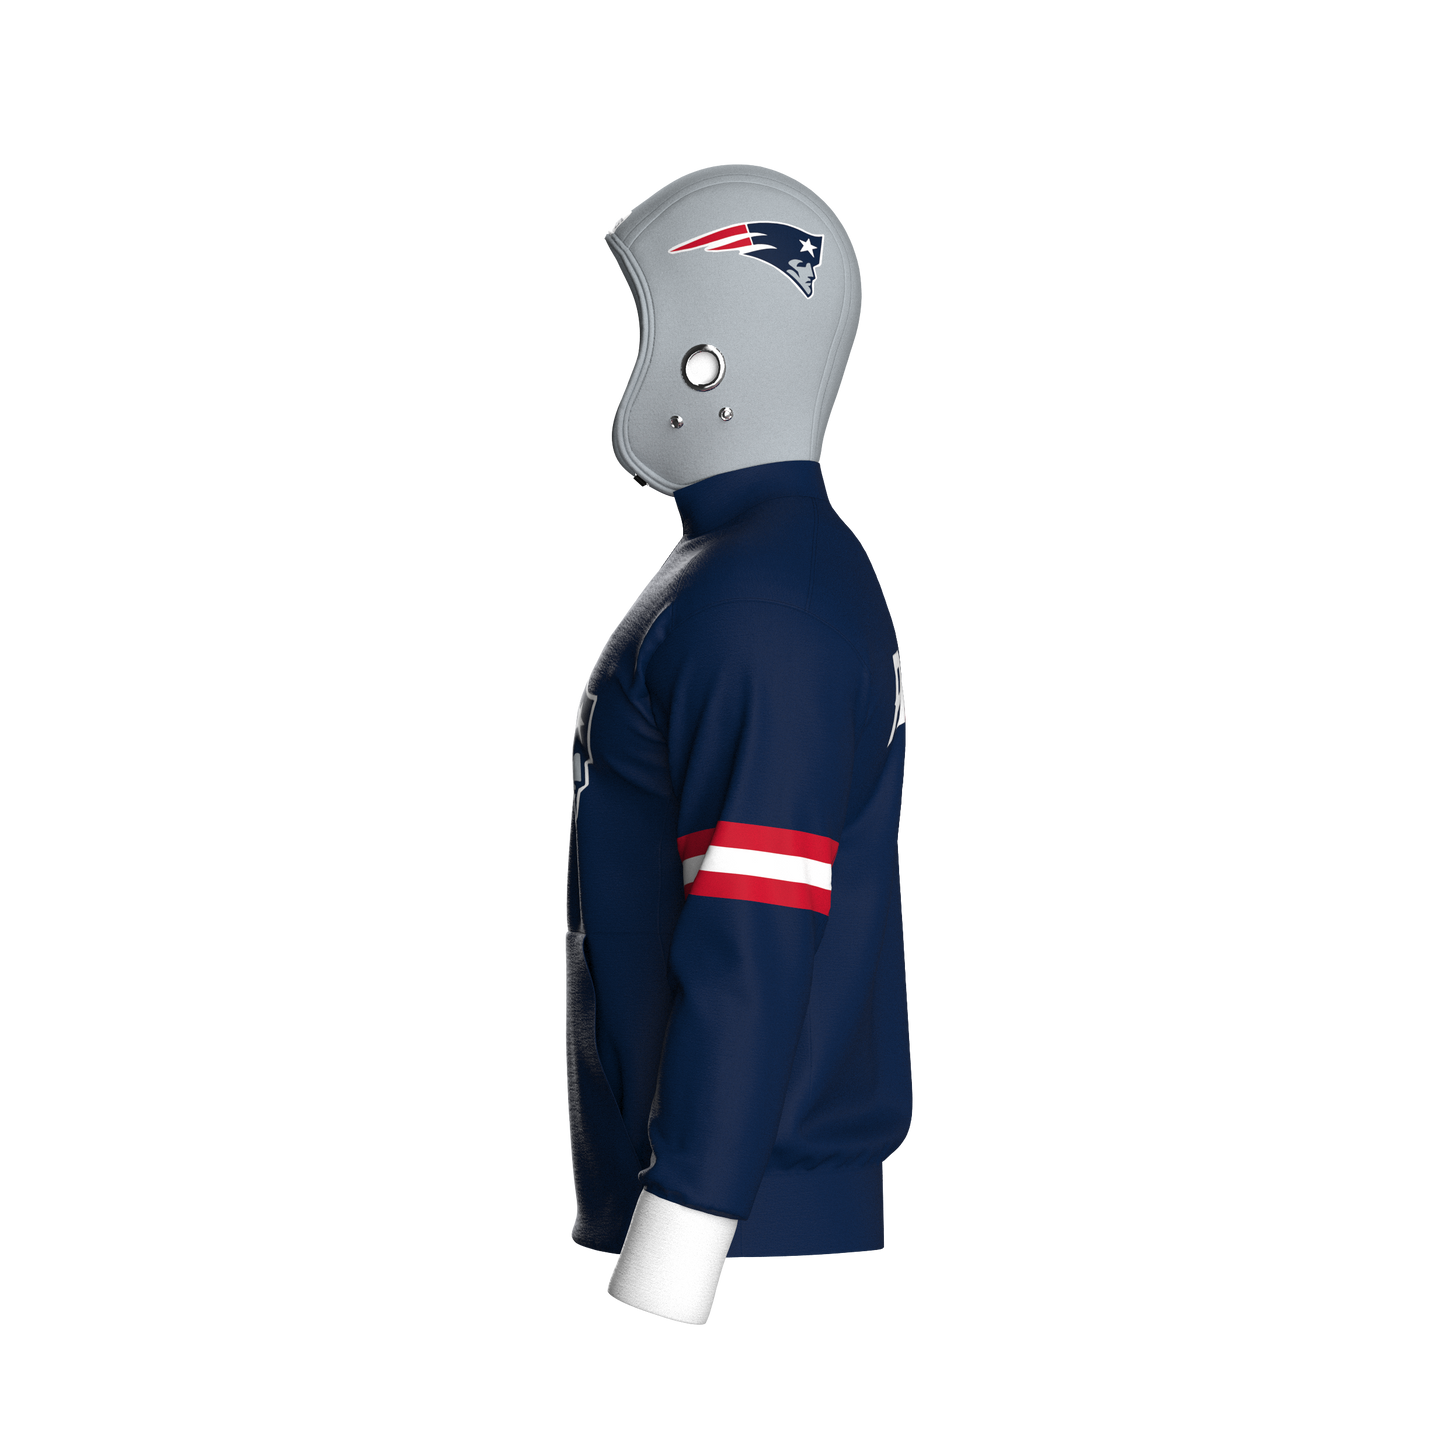 New England Patriots Home Pullover (youth)